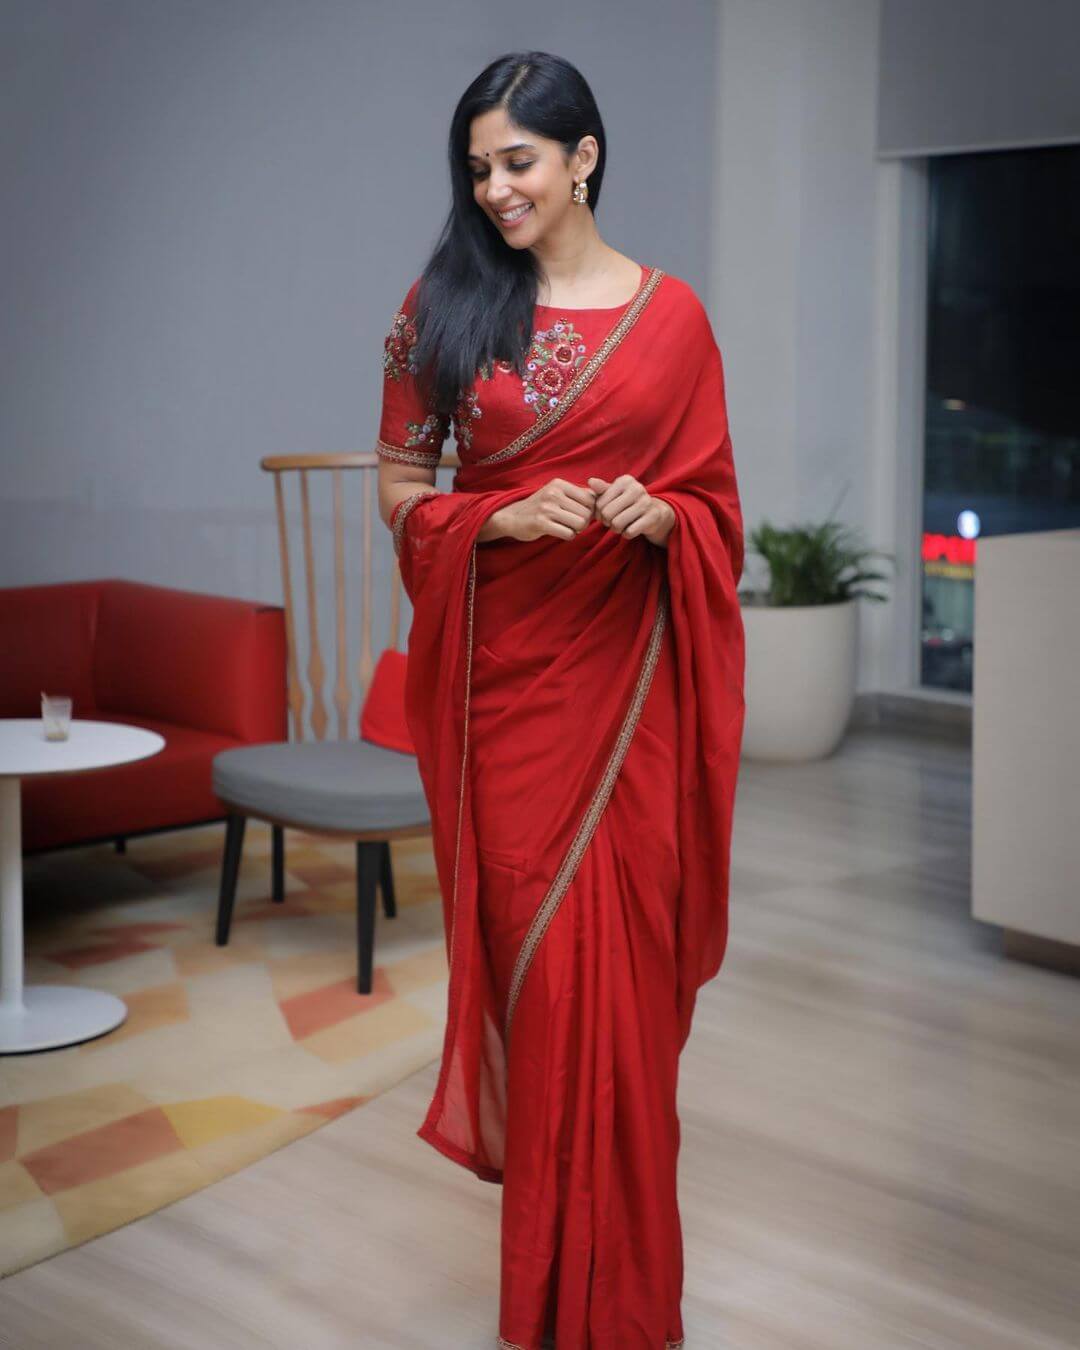 Nyla Usha Look Fabulous In Red Saree With Embroidered Blouse